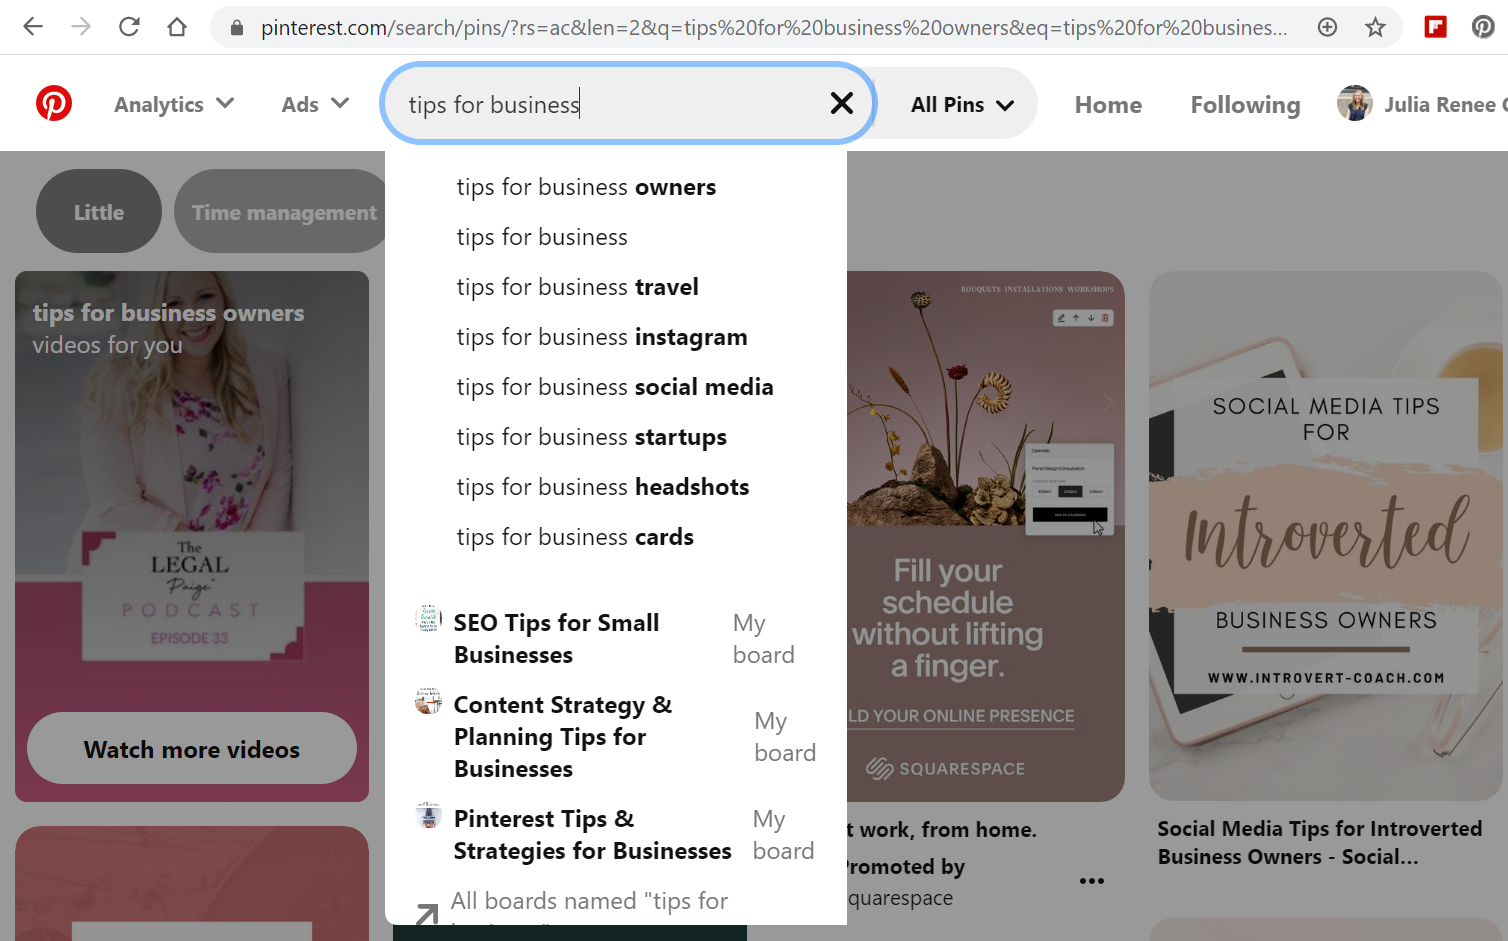 Search results for "tips for business" in Pinterest